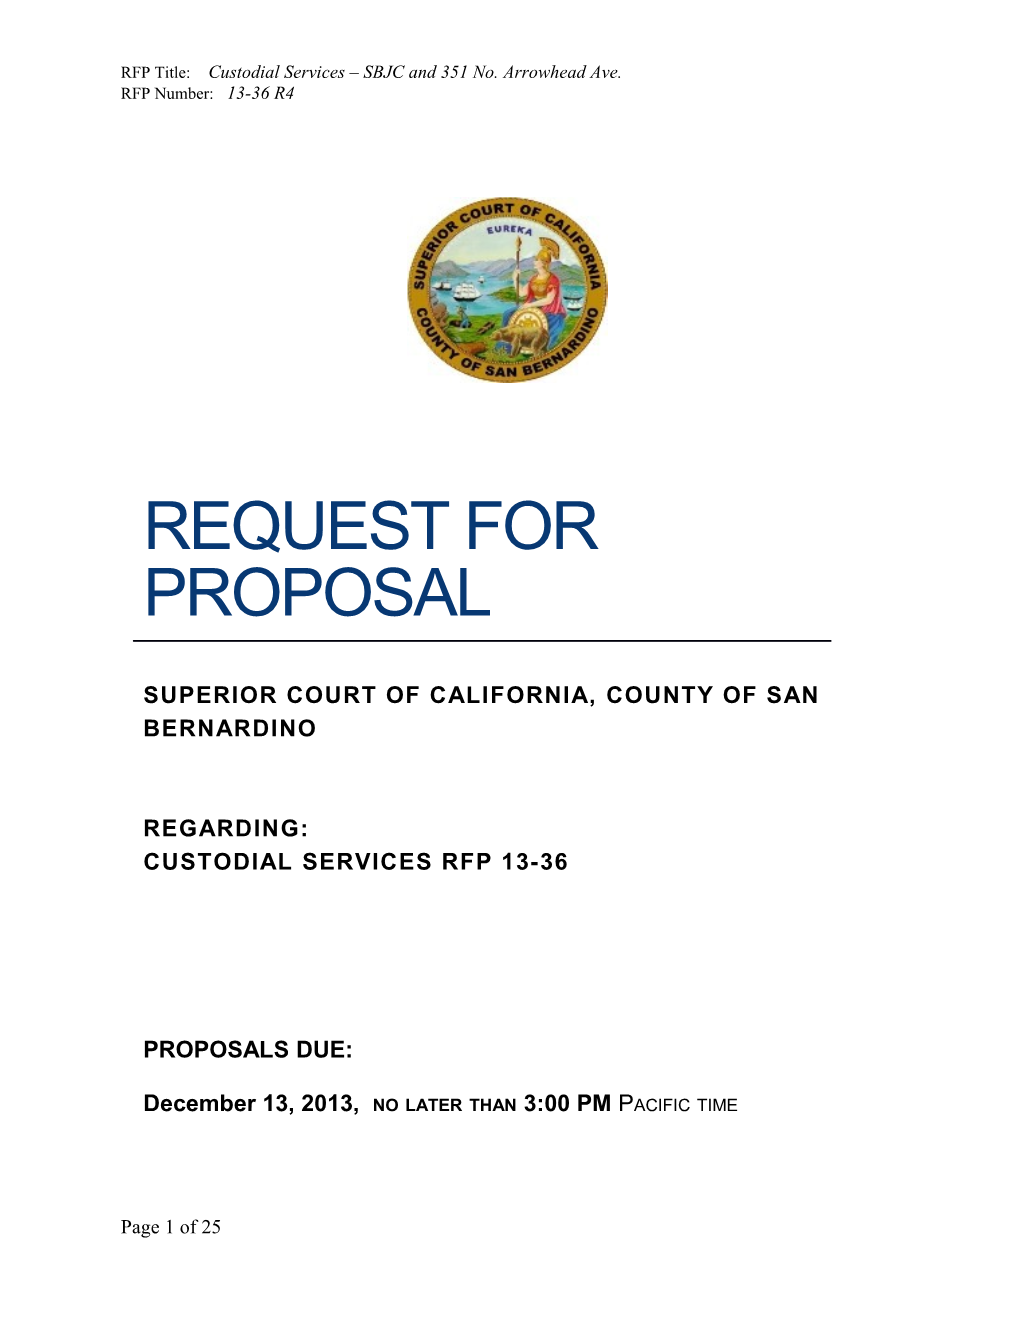 RFP Title: Custodial Services SBJC and 351 No. Arrowhead Ave